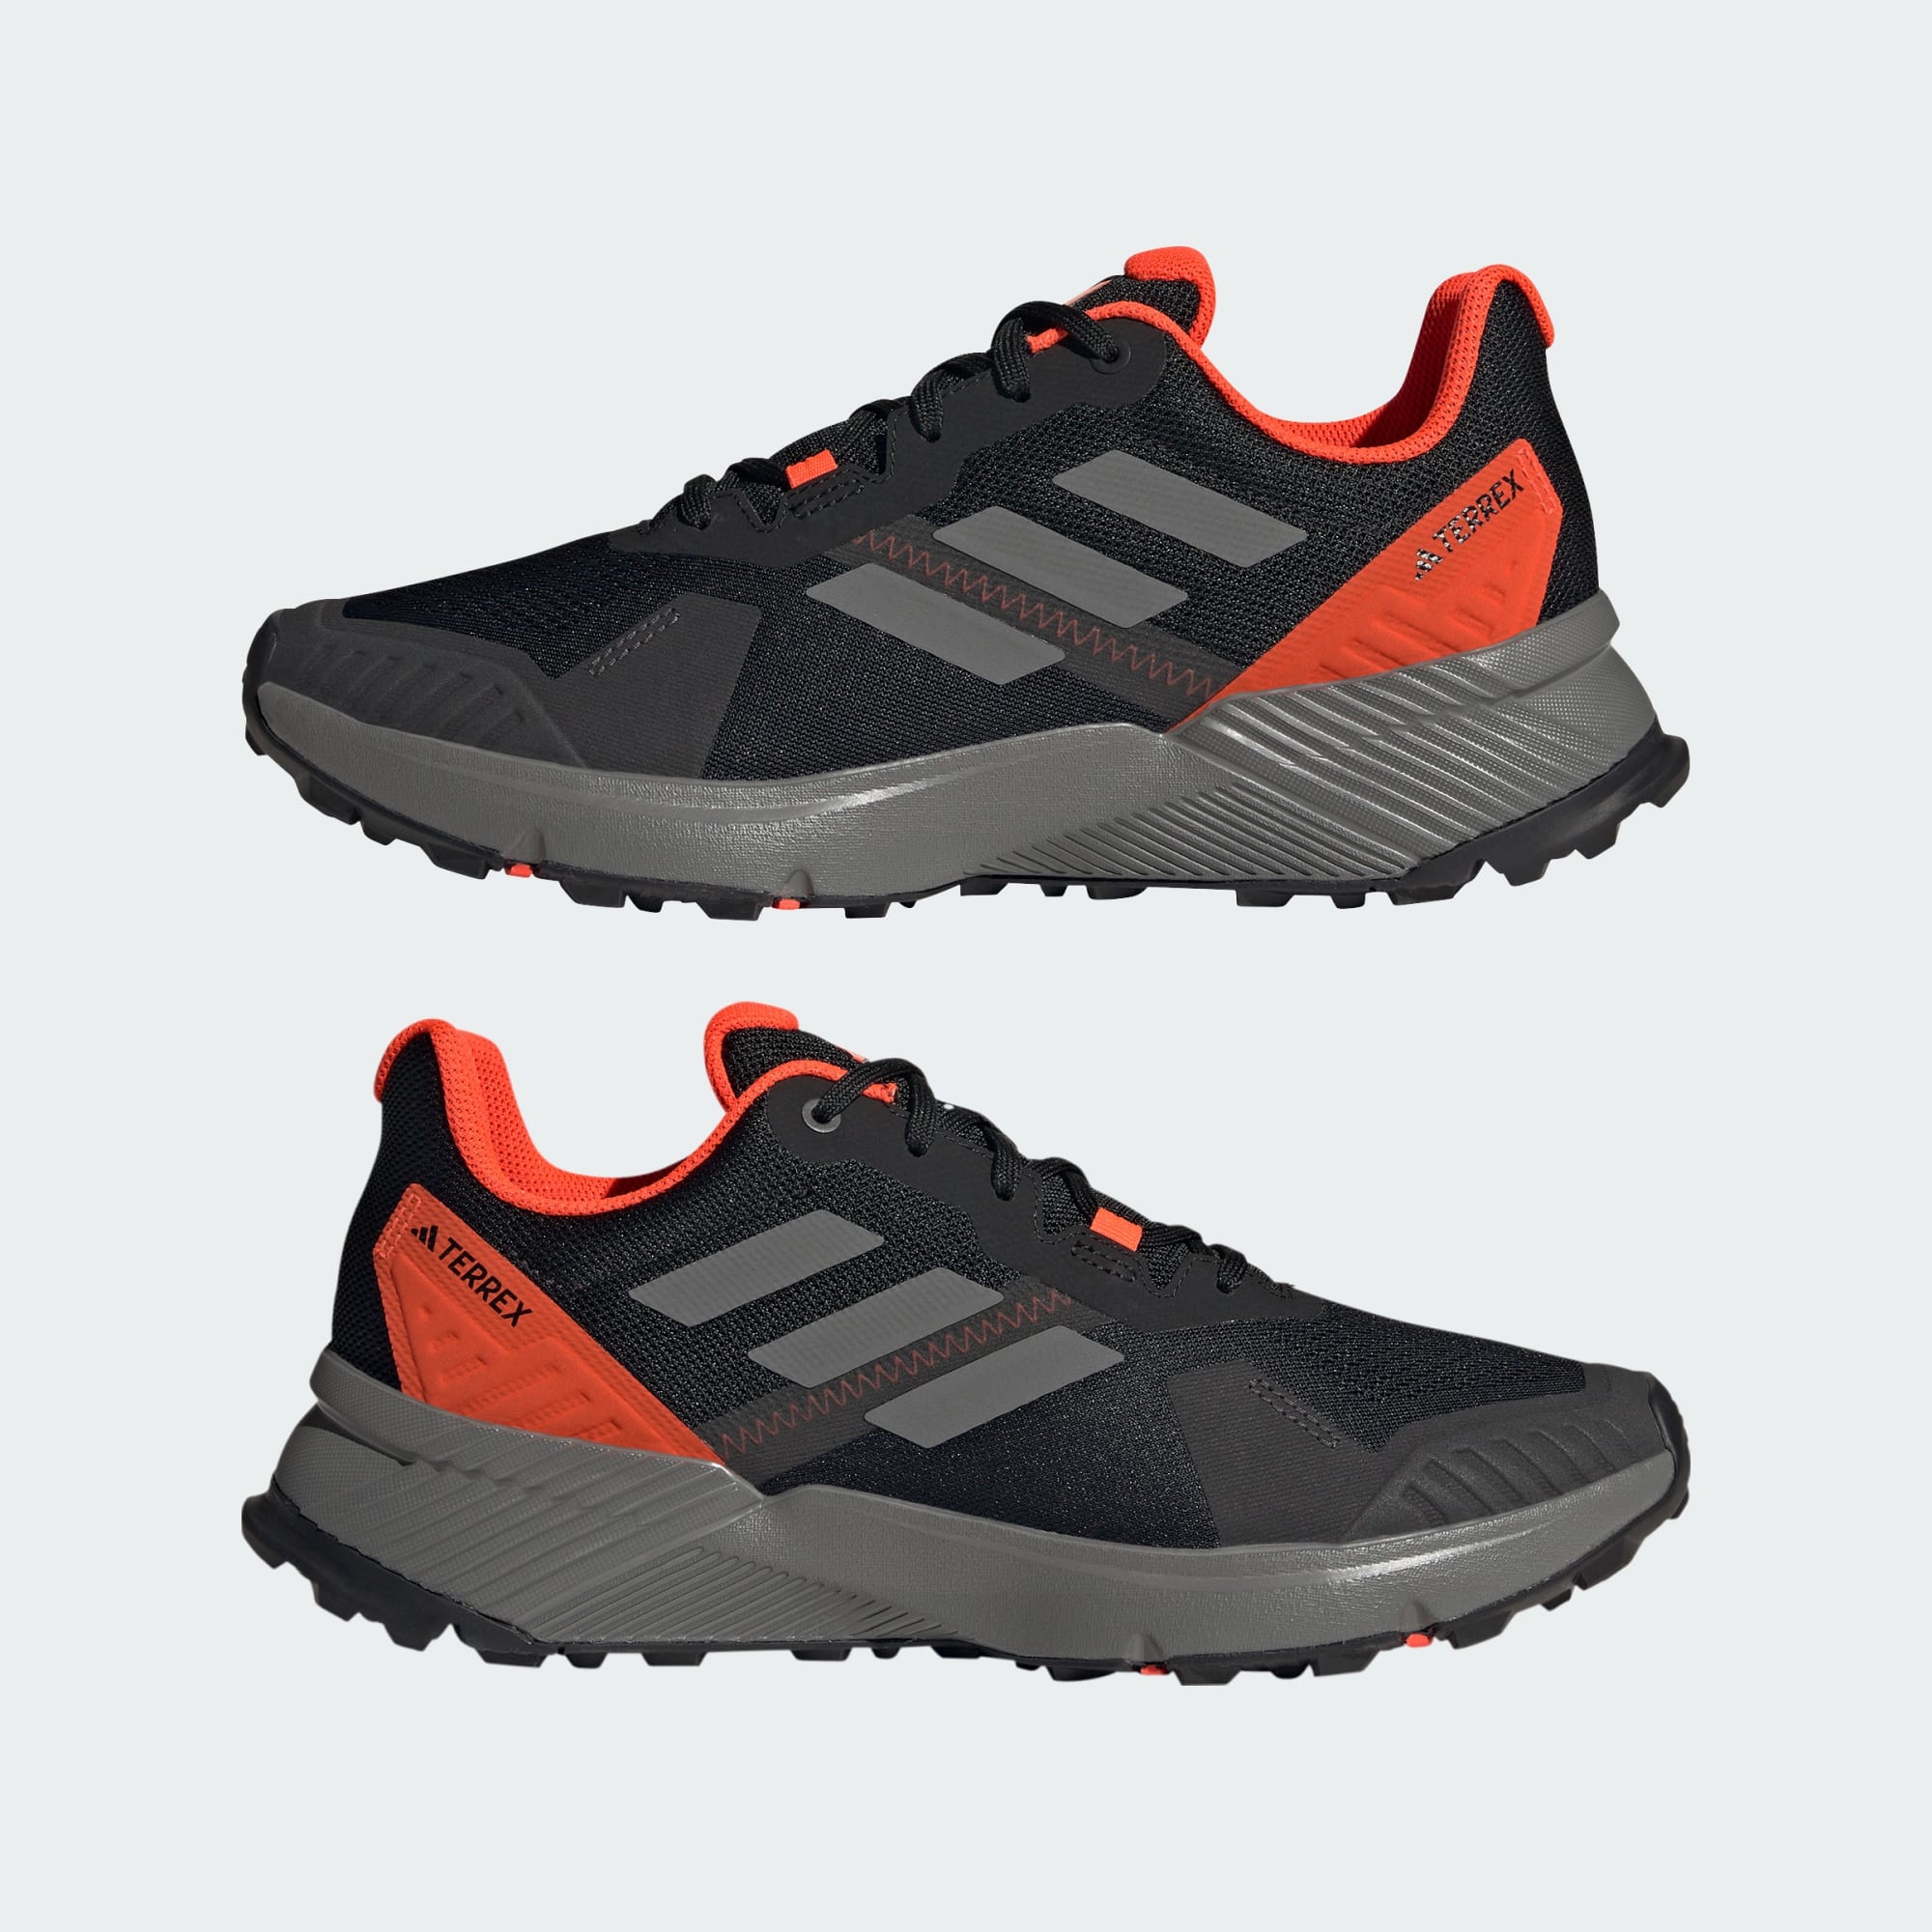 adidas Men's Terrex Soulstride Flow Trail Running Shoes (2 colors) $44 + Free Shipping